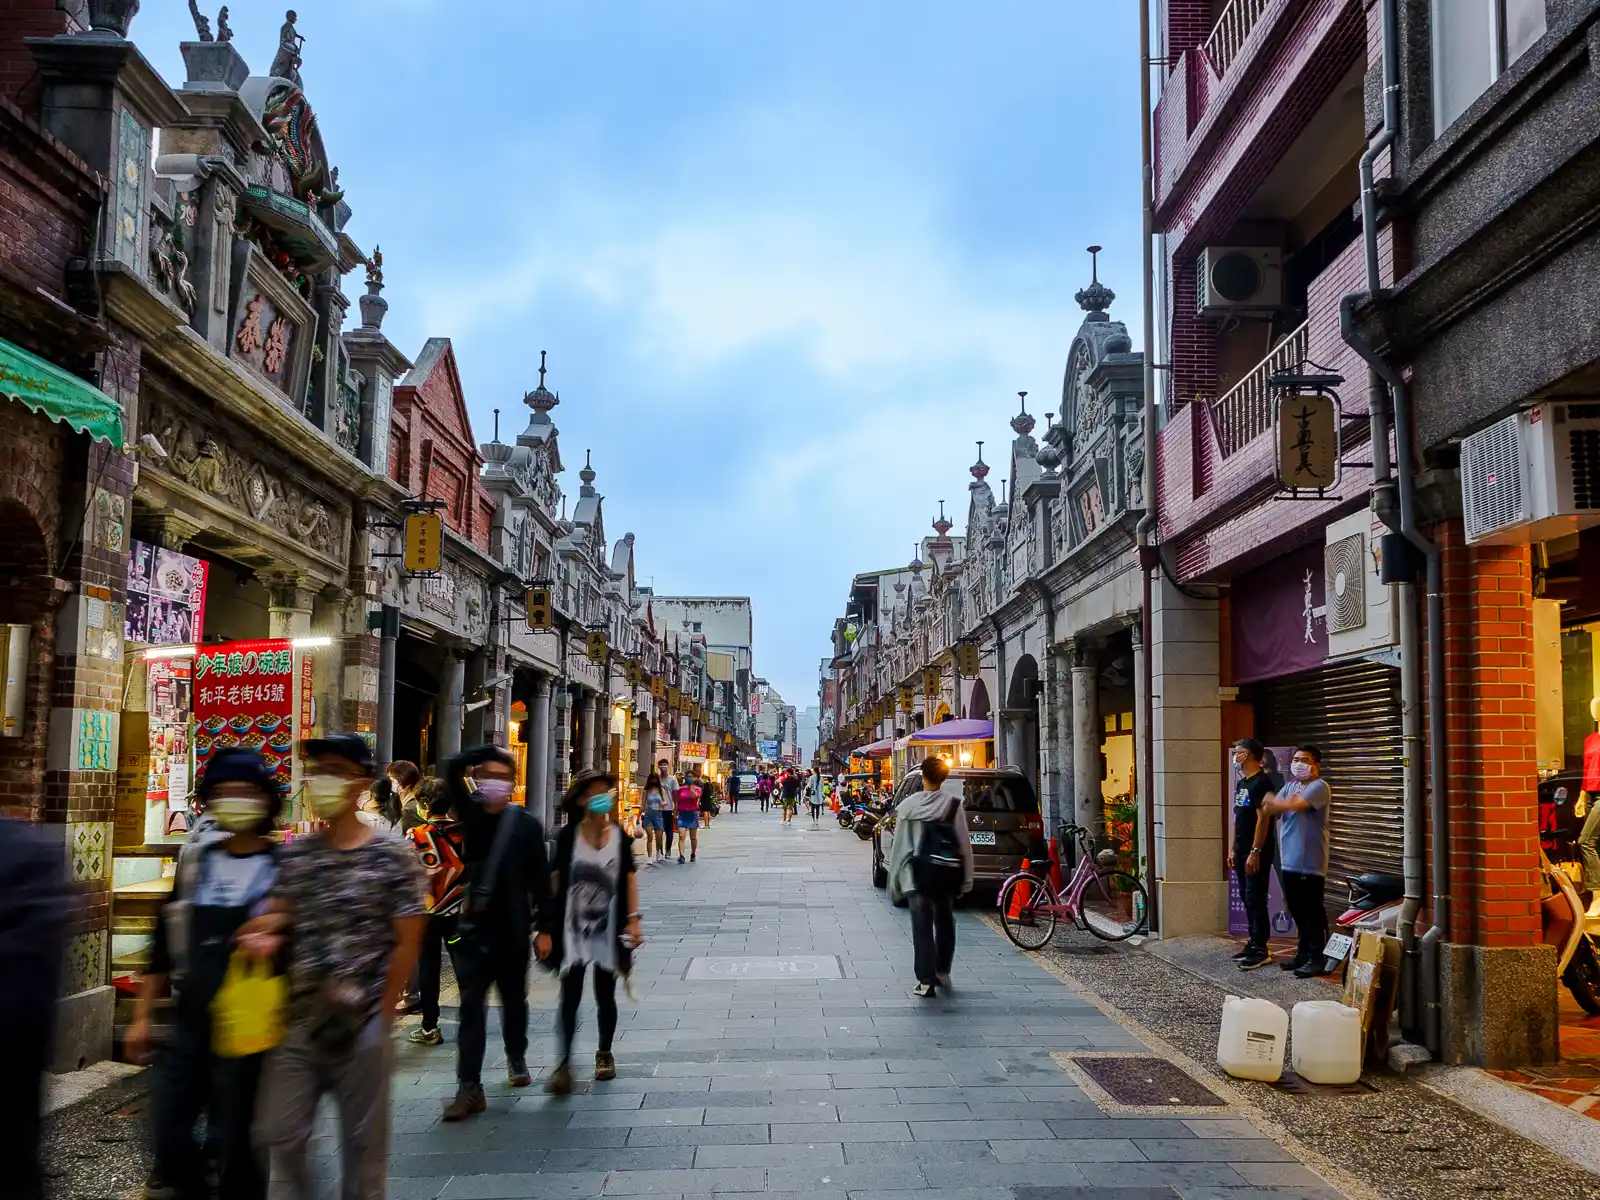 Elaborate storefronts decorated with stone columns and extravagant roof carvings extend down Heping Street as far as the eye can see.